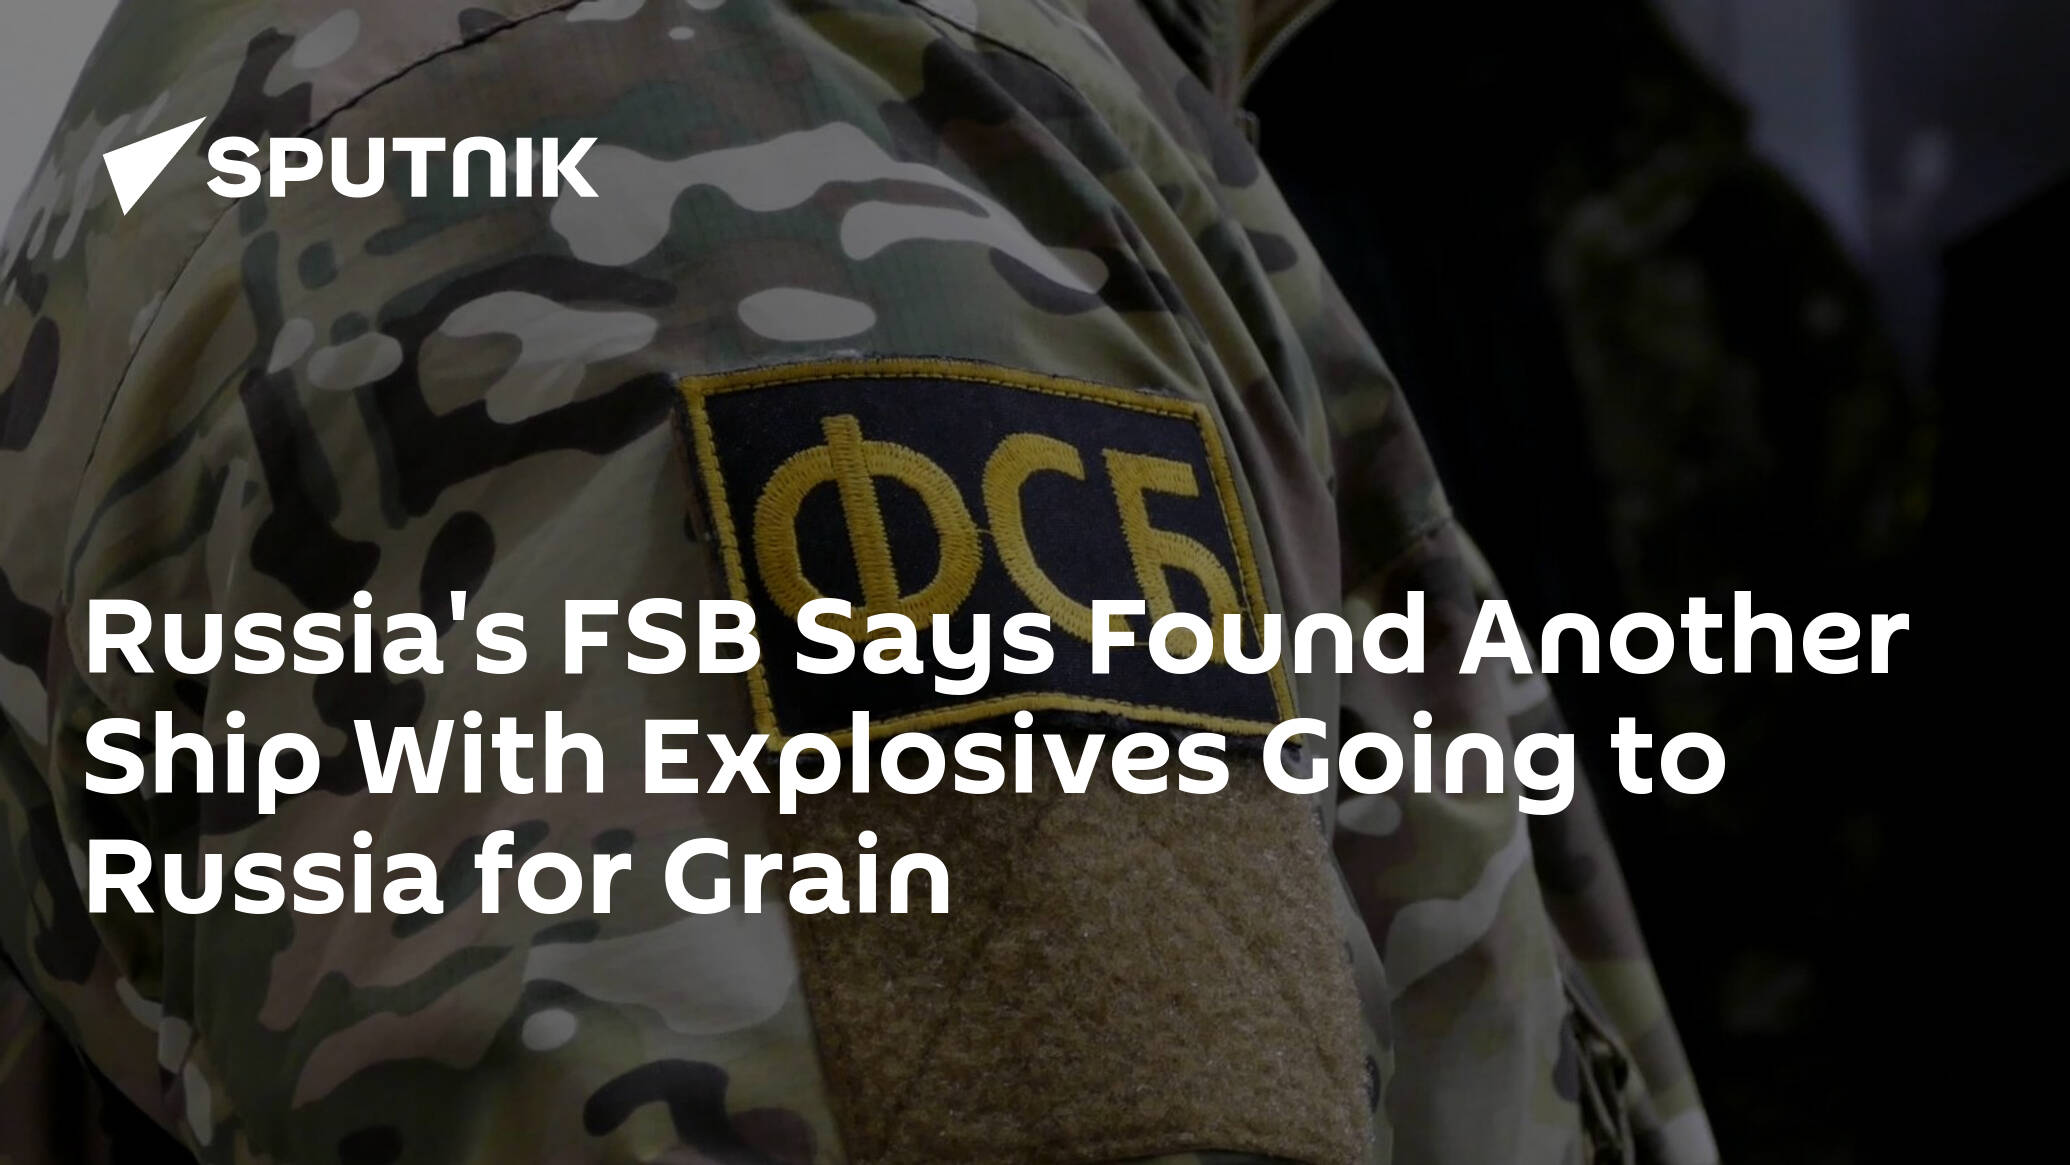 Russia's FSB Says Found Another Ship With Explosives Going to Russia for Grain